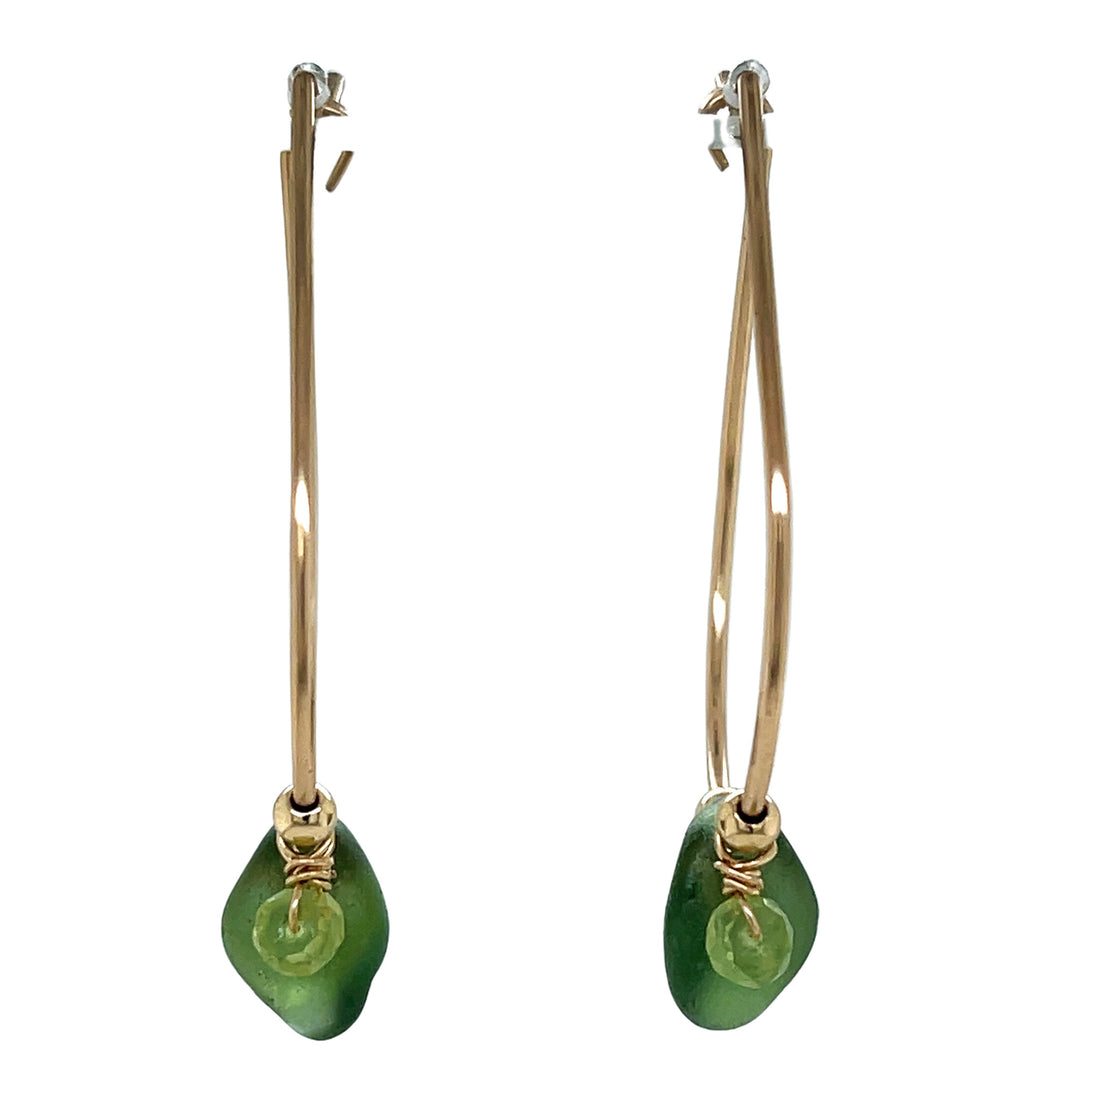 Elegant Green Sea Glass Gold Hoops with Peridot Accents - Handcrafted Everyday Earrings for a Touch of Nature